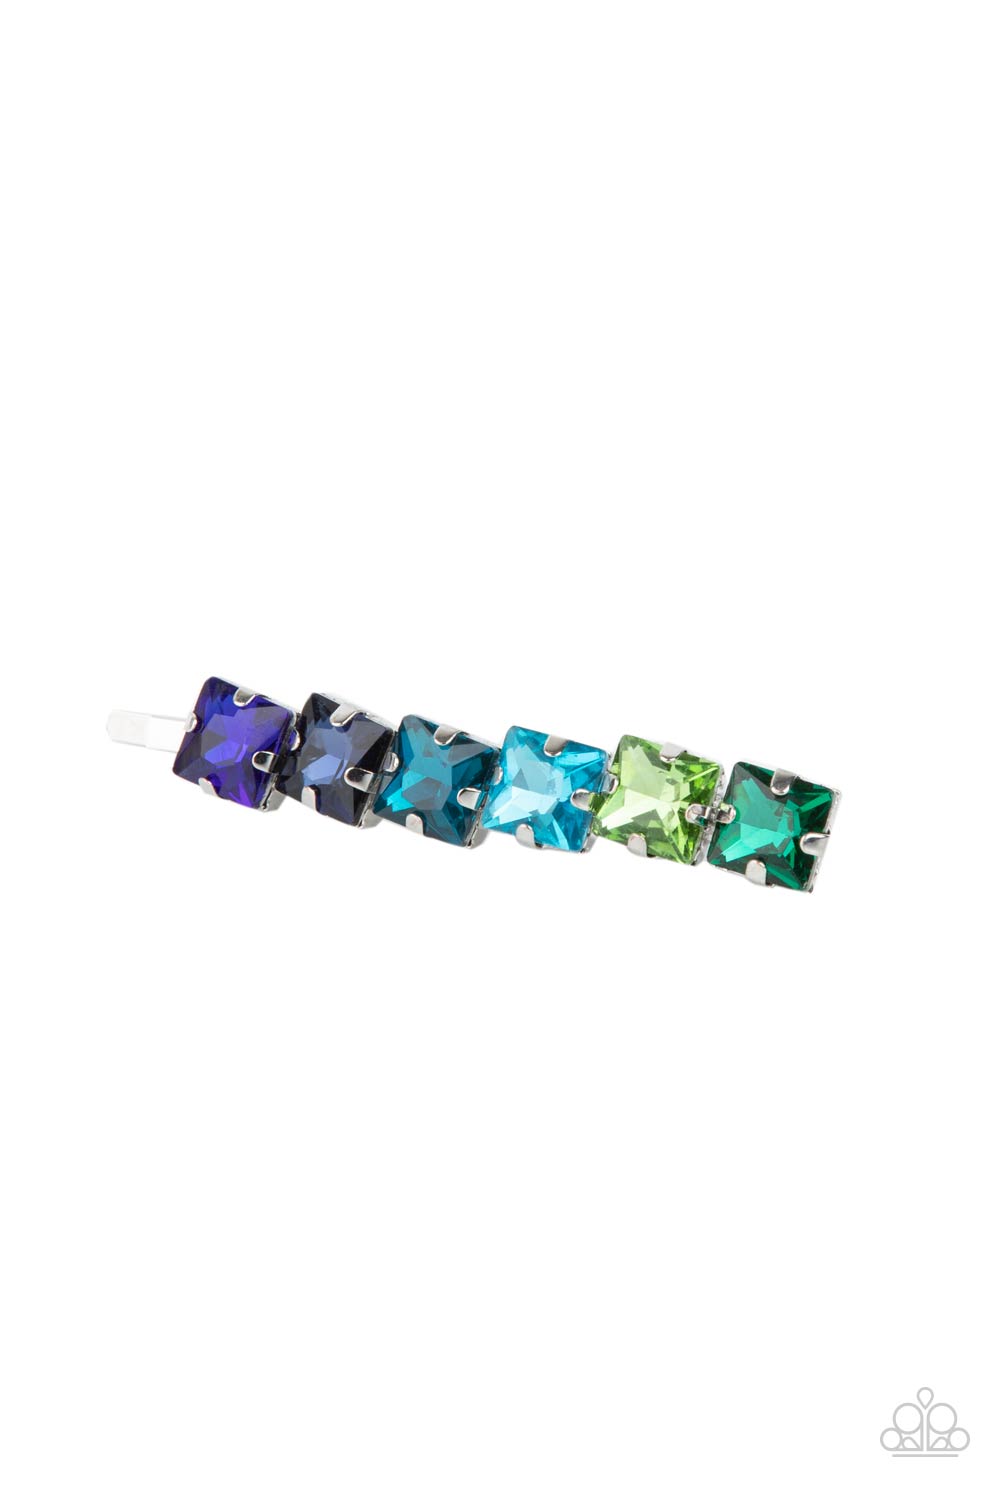 Prismatically Pinned Multi Green Blue Hair Pin - Paparazzi Accessories- lightbox - CarasShop.com - $5 Jewelry by Cara Jewels